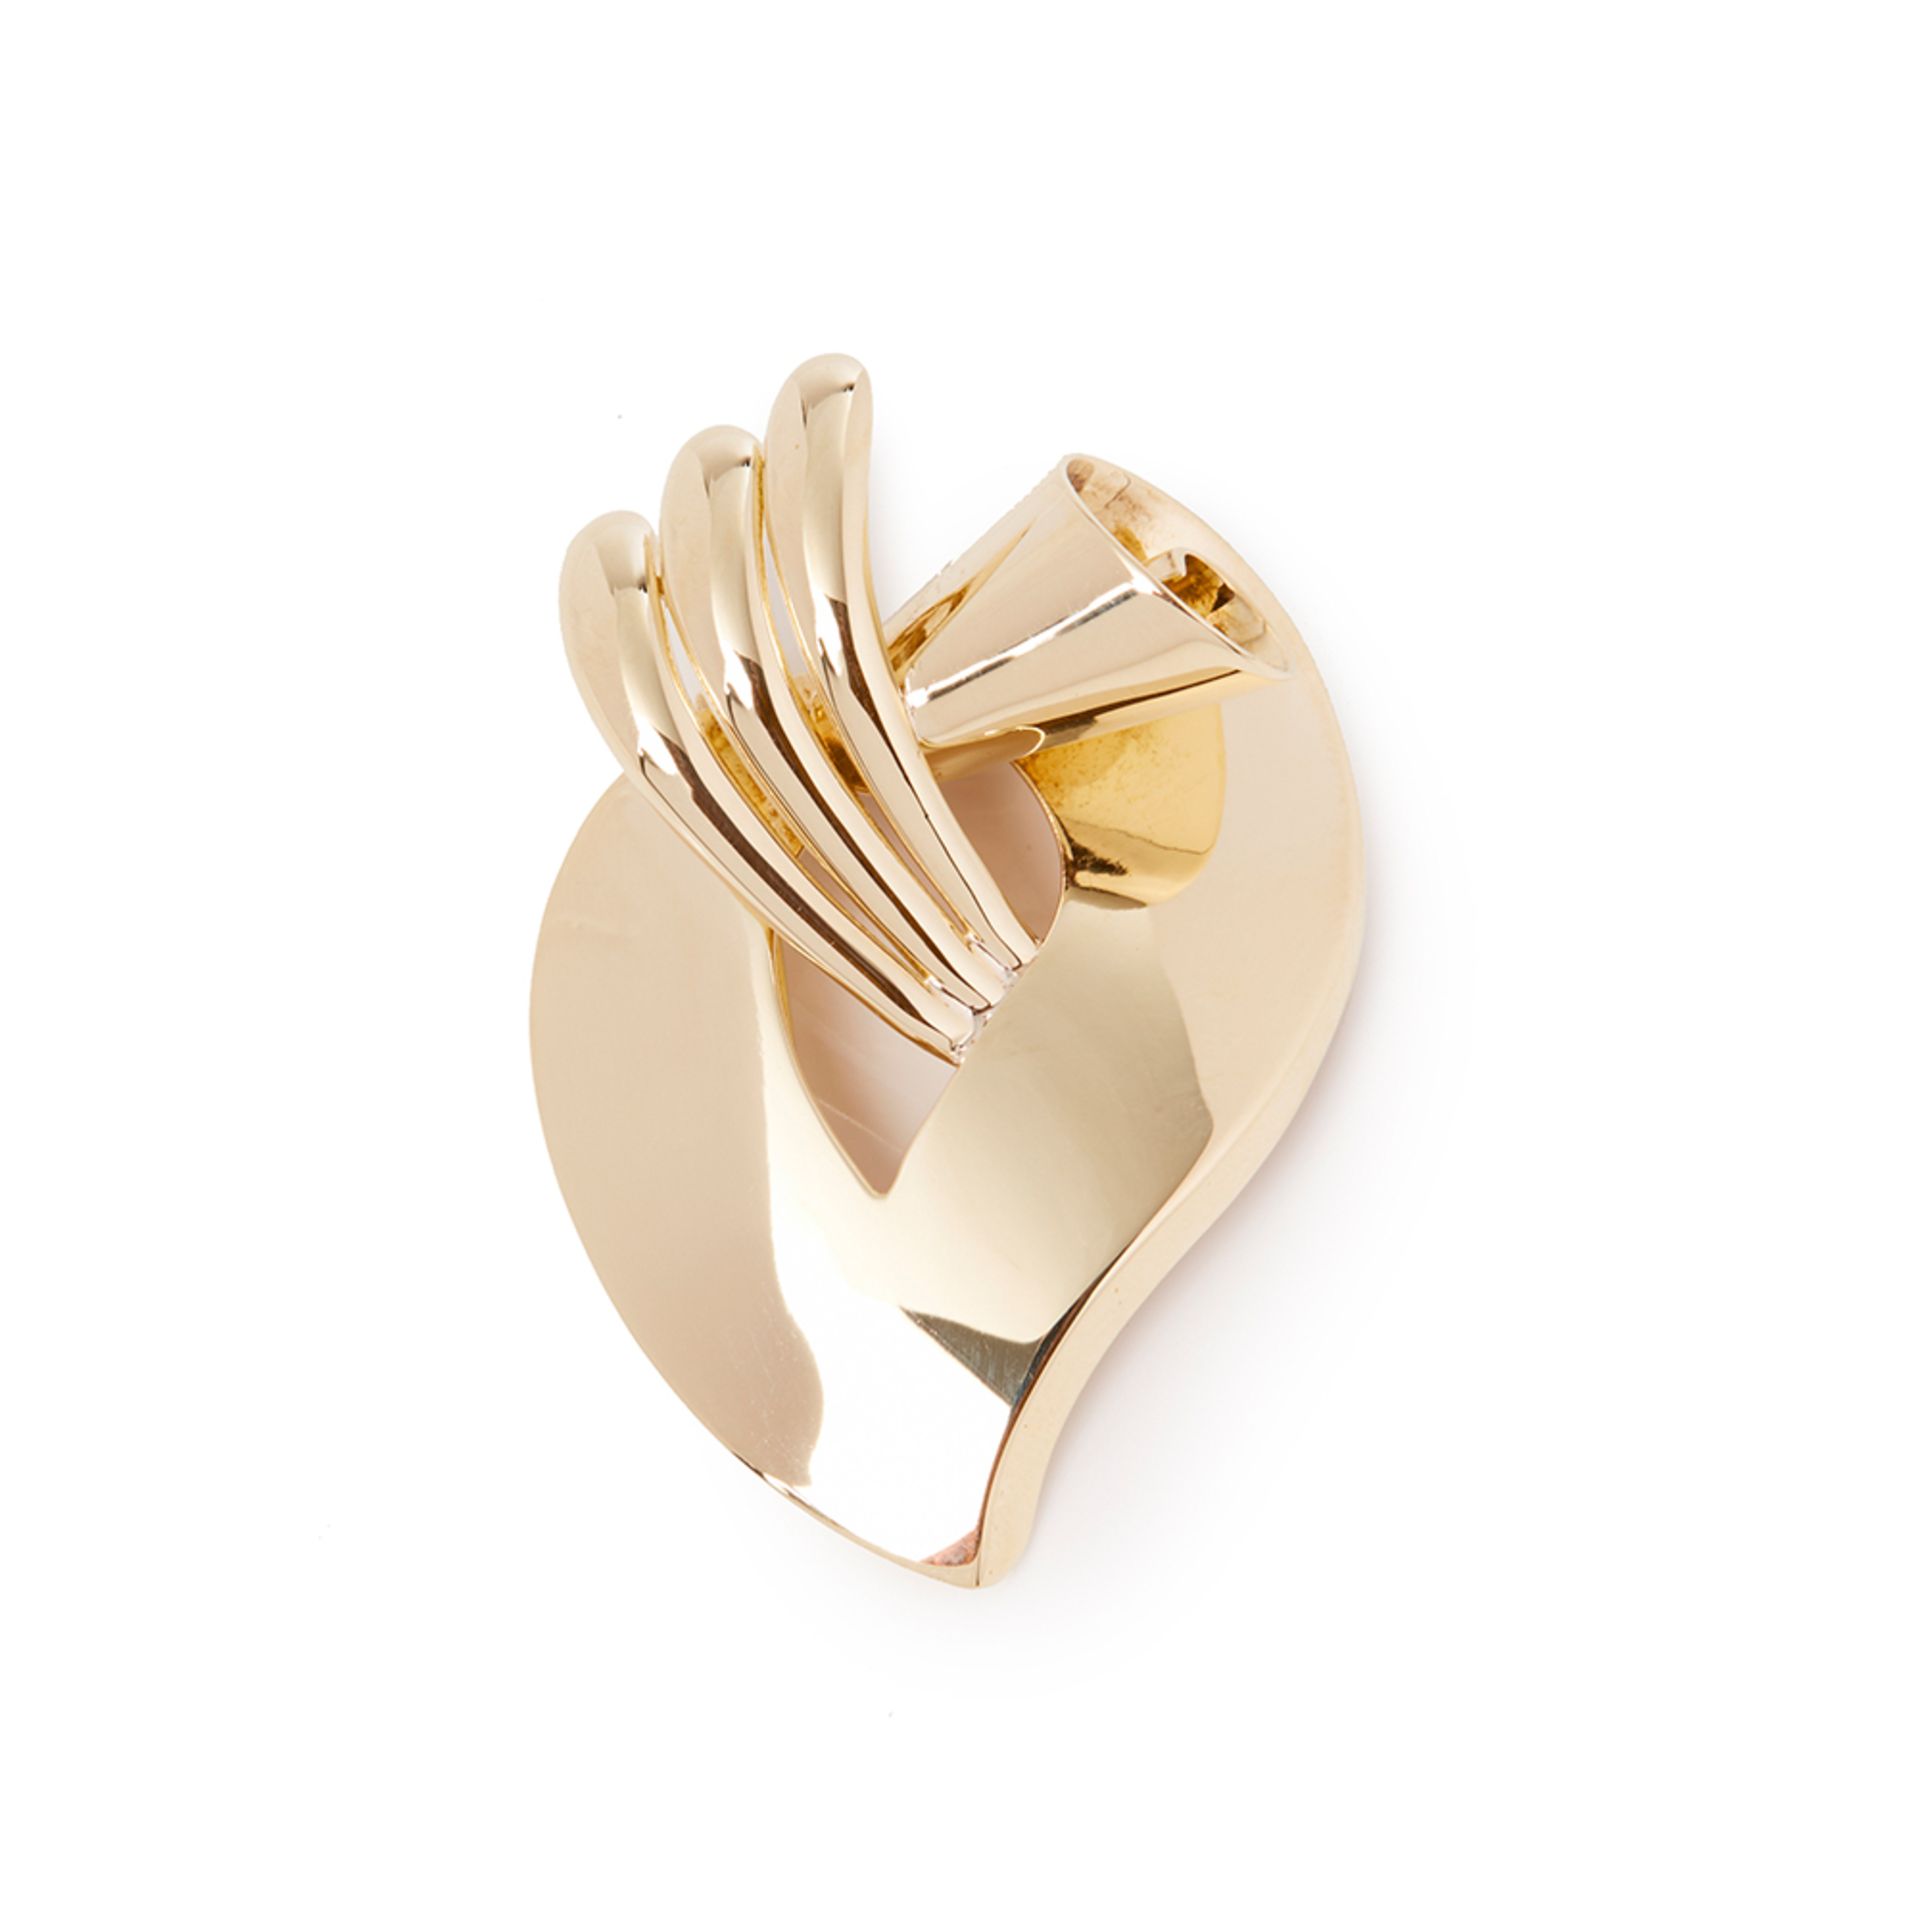 Tiffany & Co. 14k Yellow Gold Brooch - Image 7 of 7